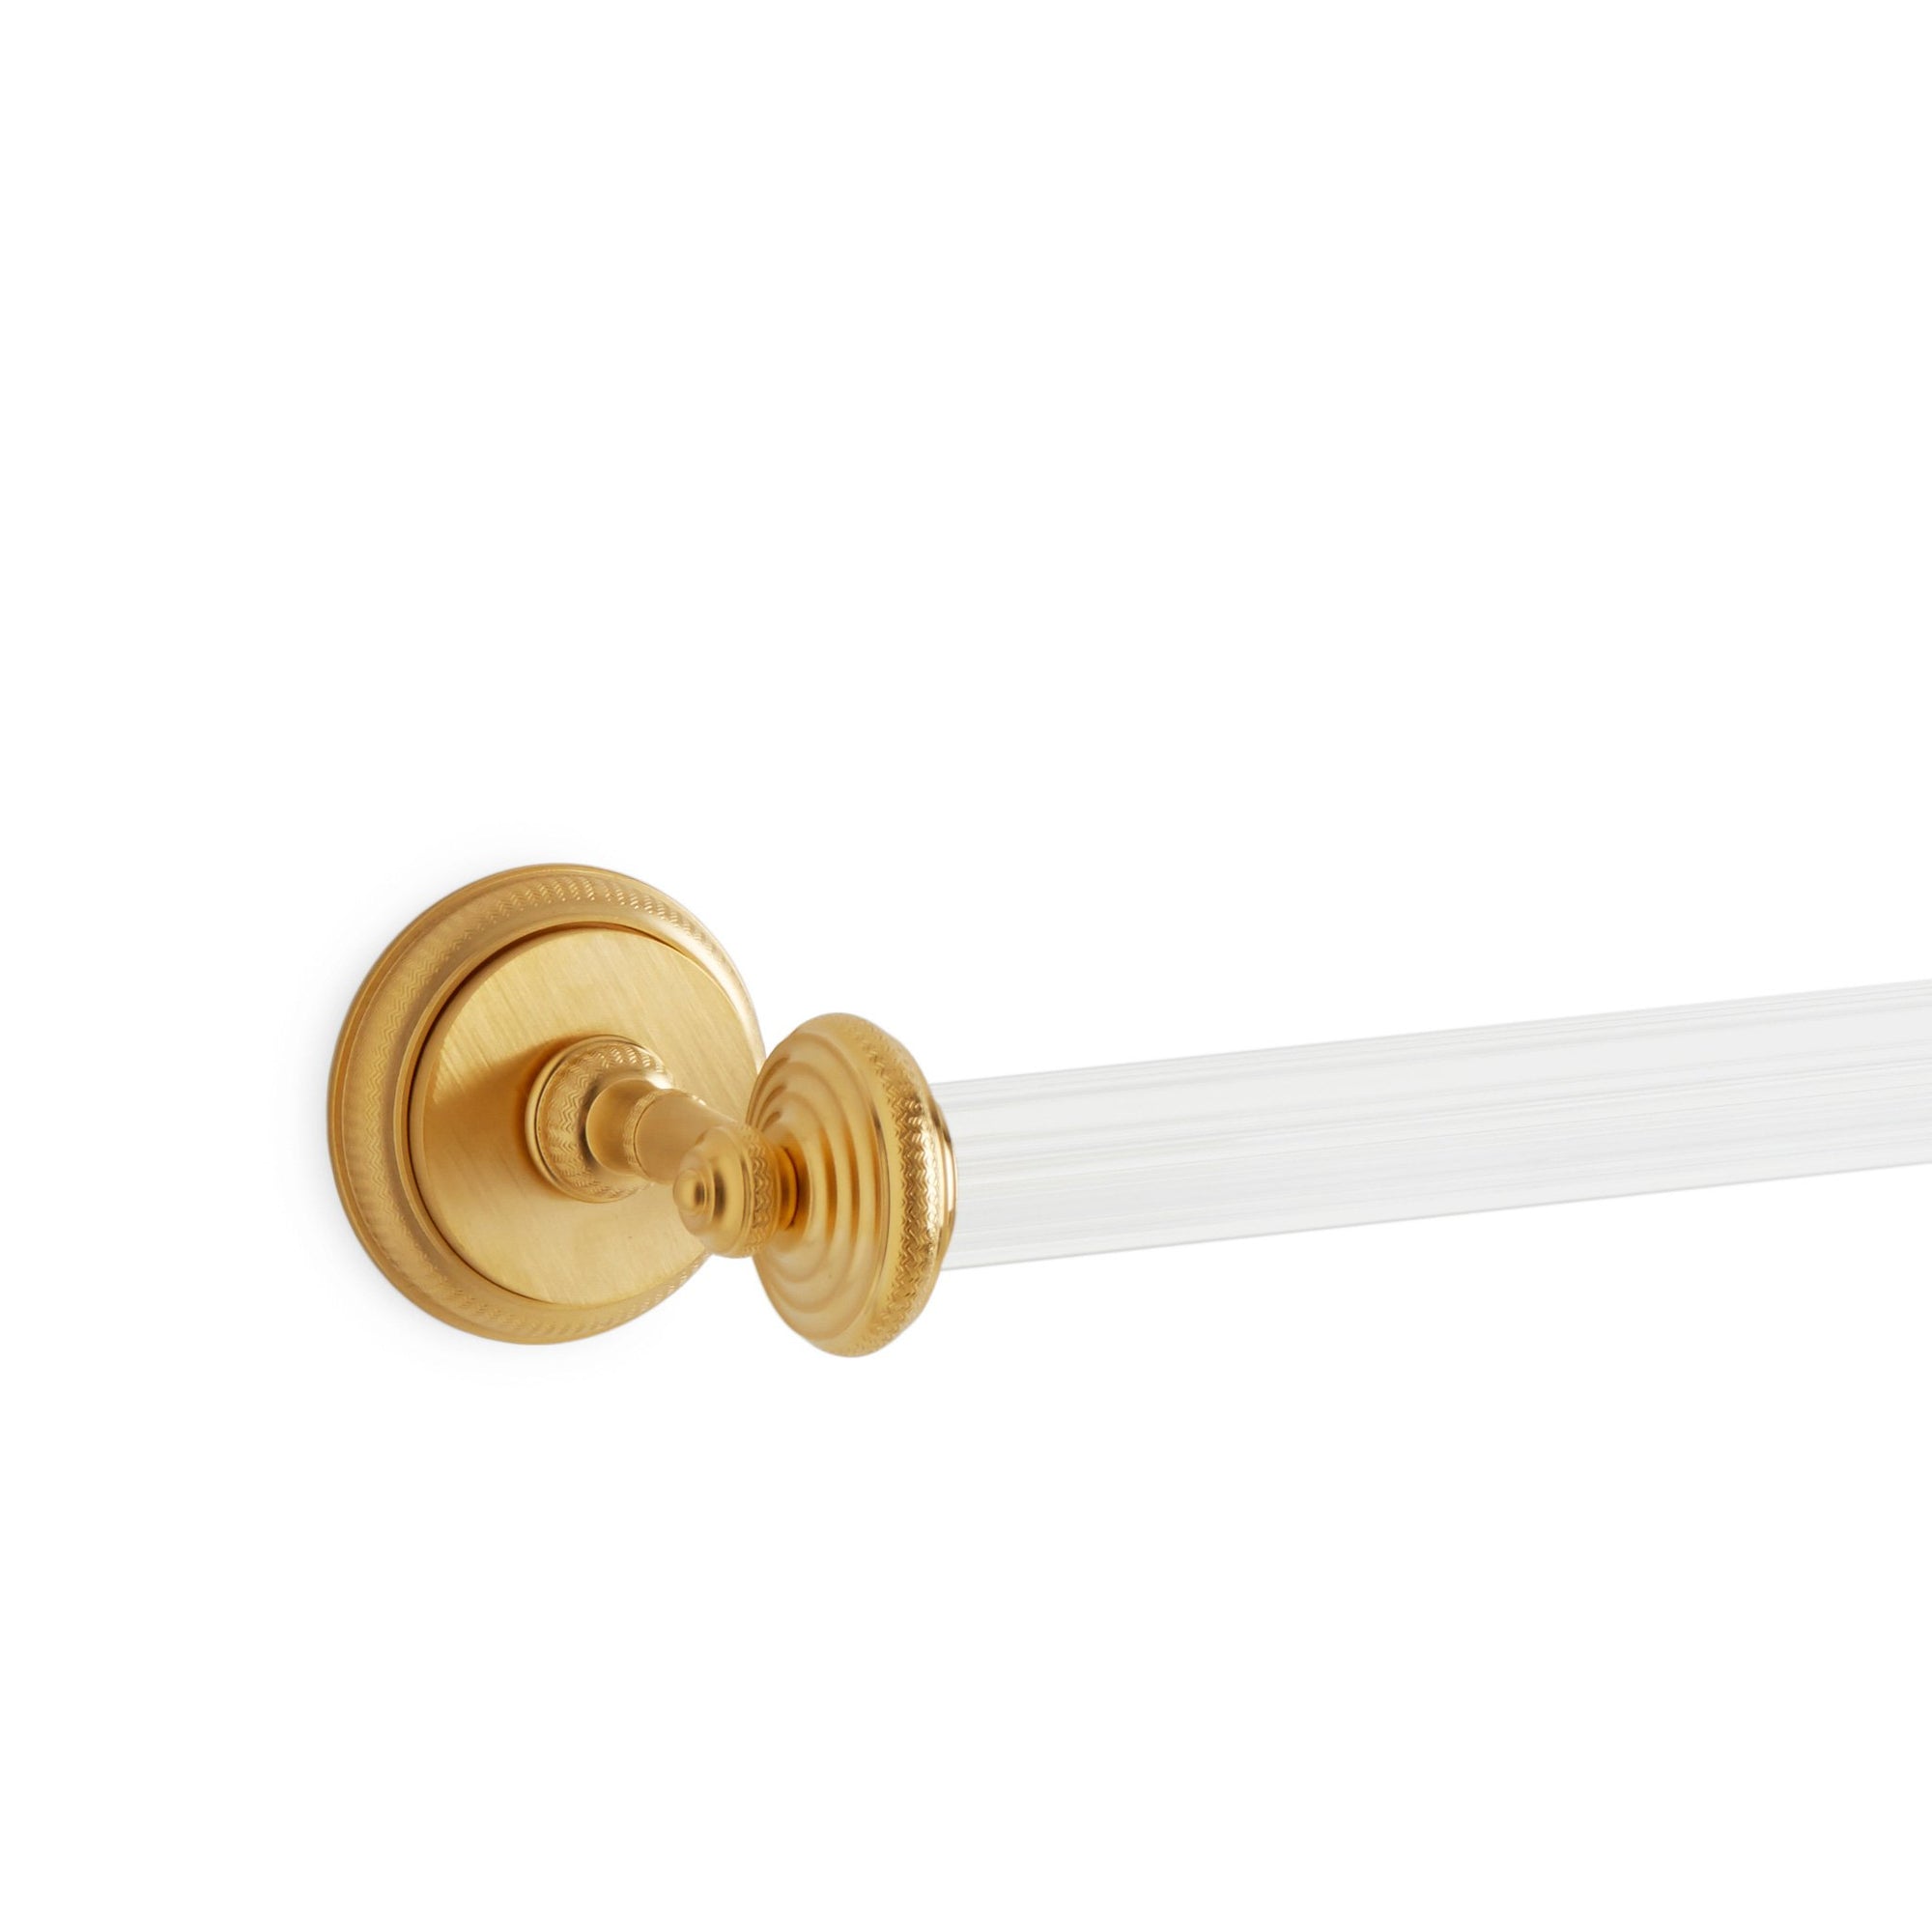 3695-MLIN-30FL-GP Sherle Wagner International Knurled Towel Bar with Metal insert in Gold Plate metal finish